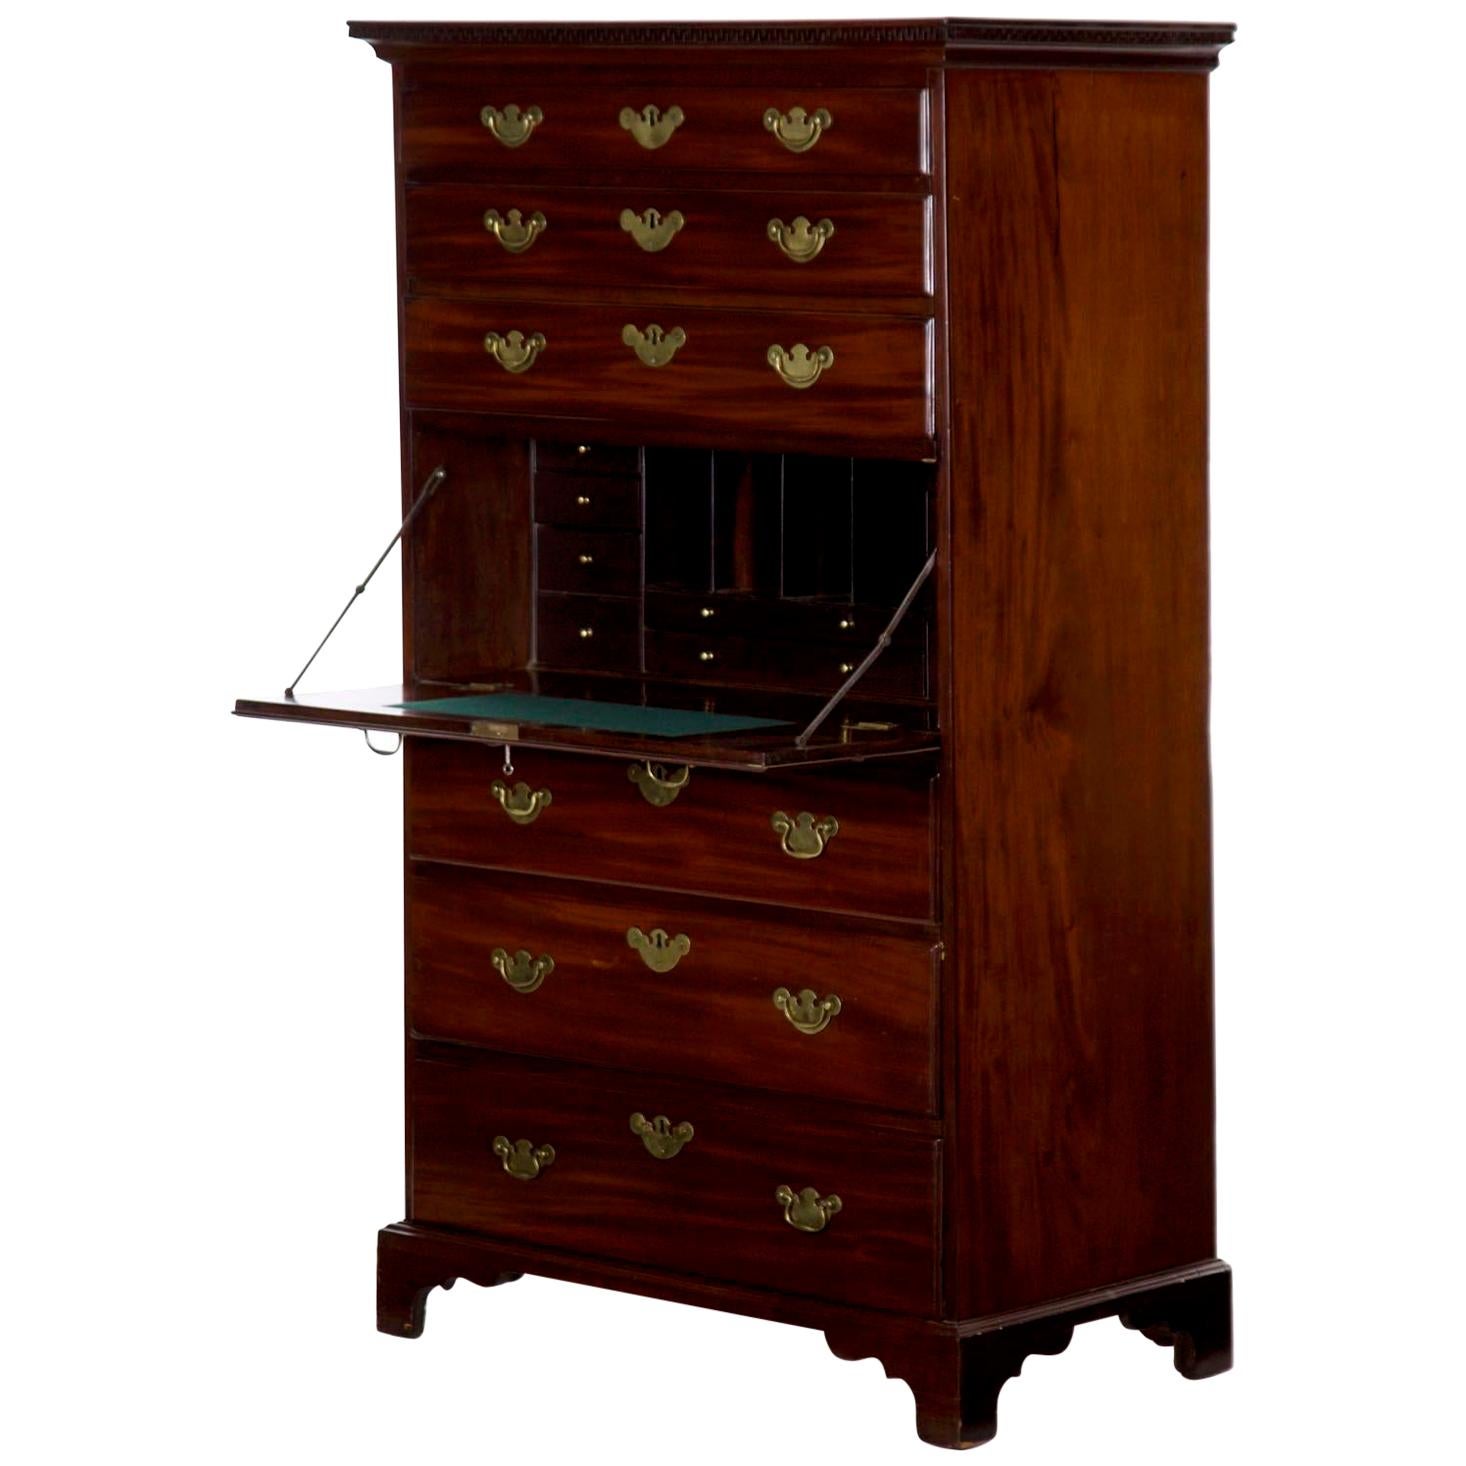 English Chippendale Mahogany Tall Chest of Drawers with Secretary Desk